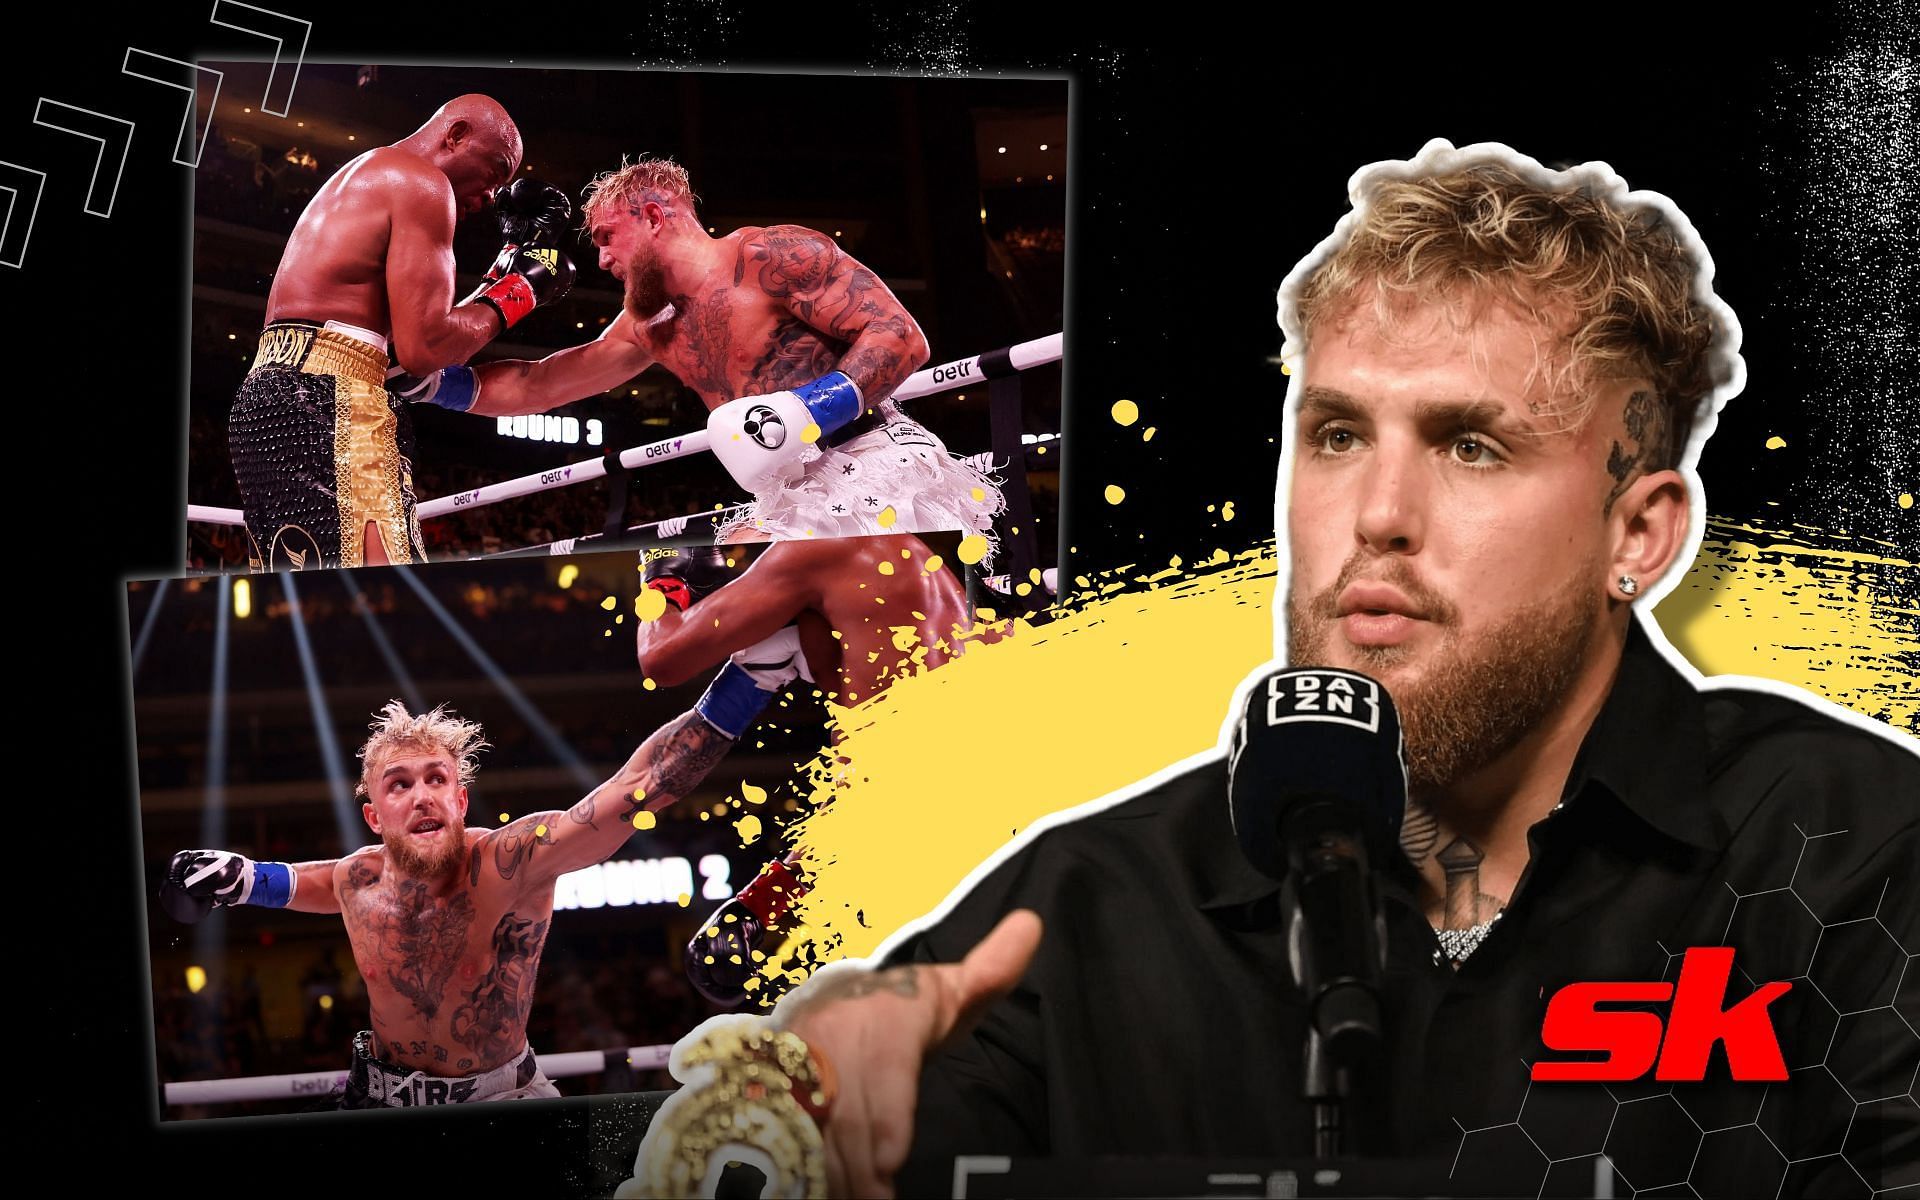  Jake Paul details the one difference between him and Anderson Silva that helped him win the fight. [Image credits: Getty Images.]